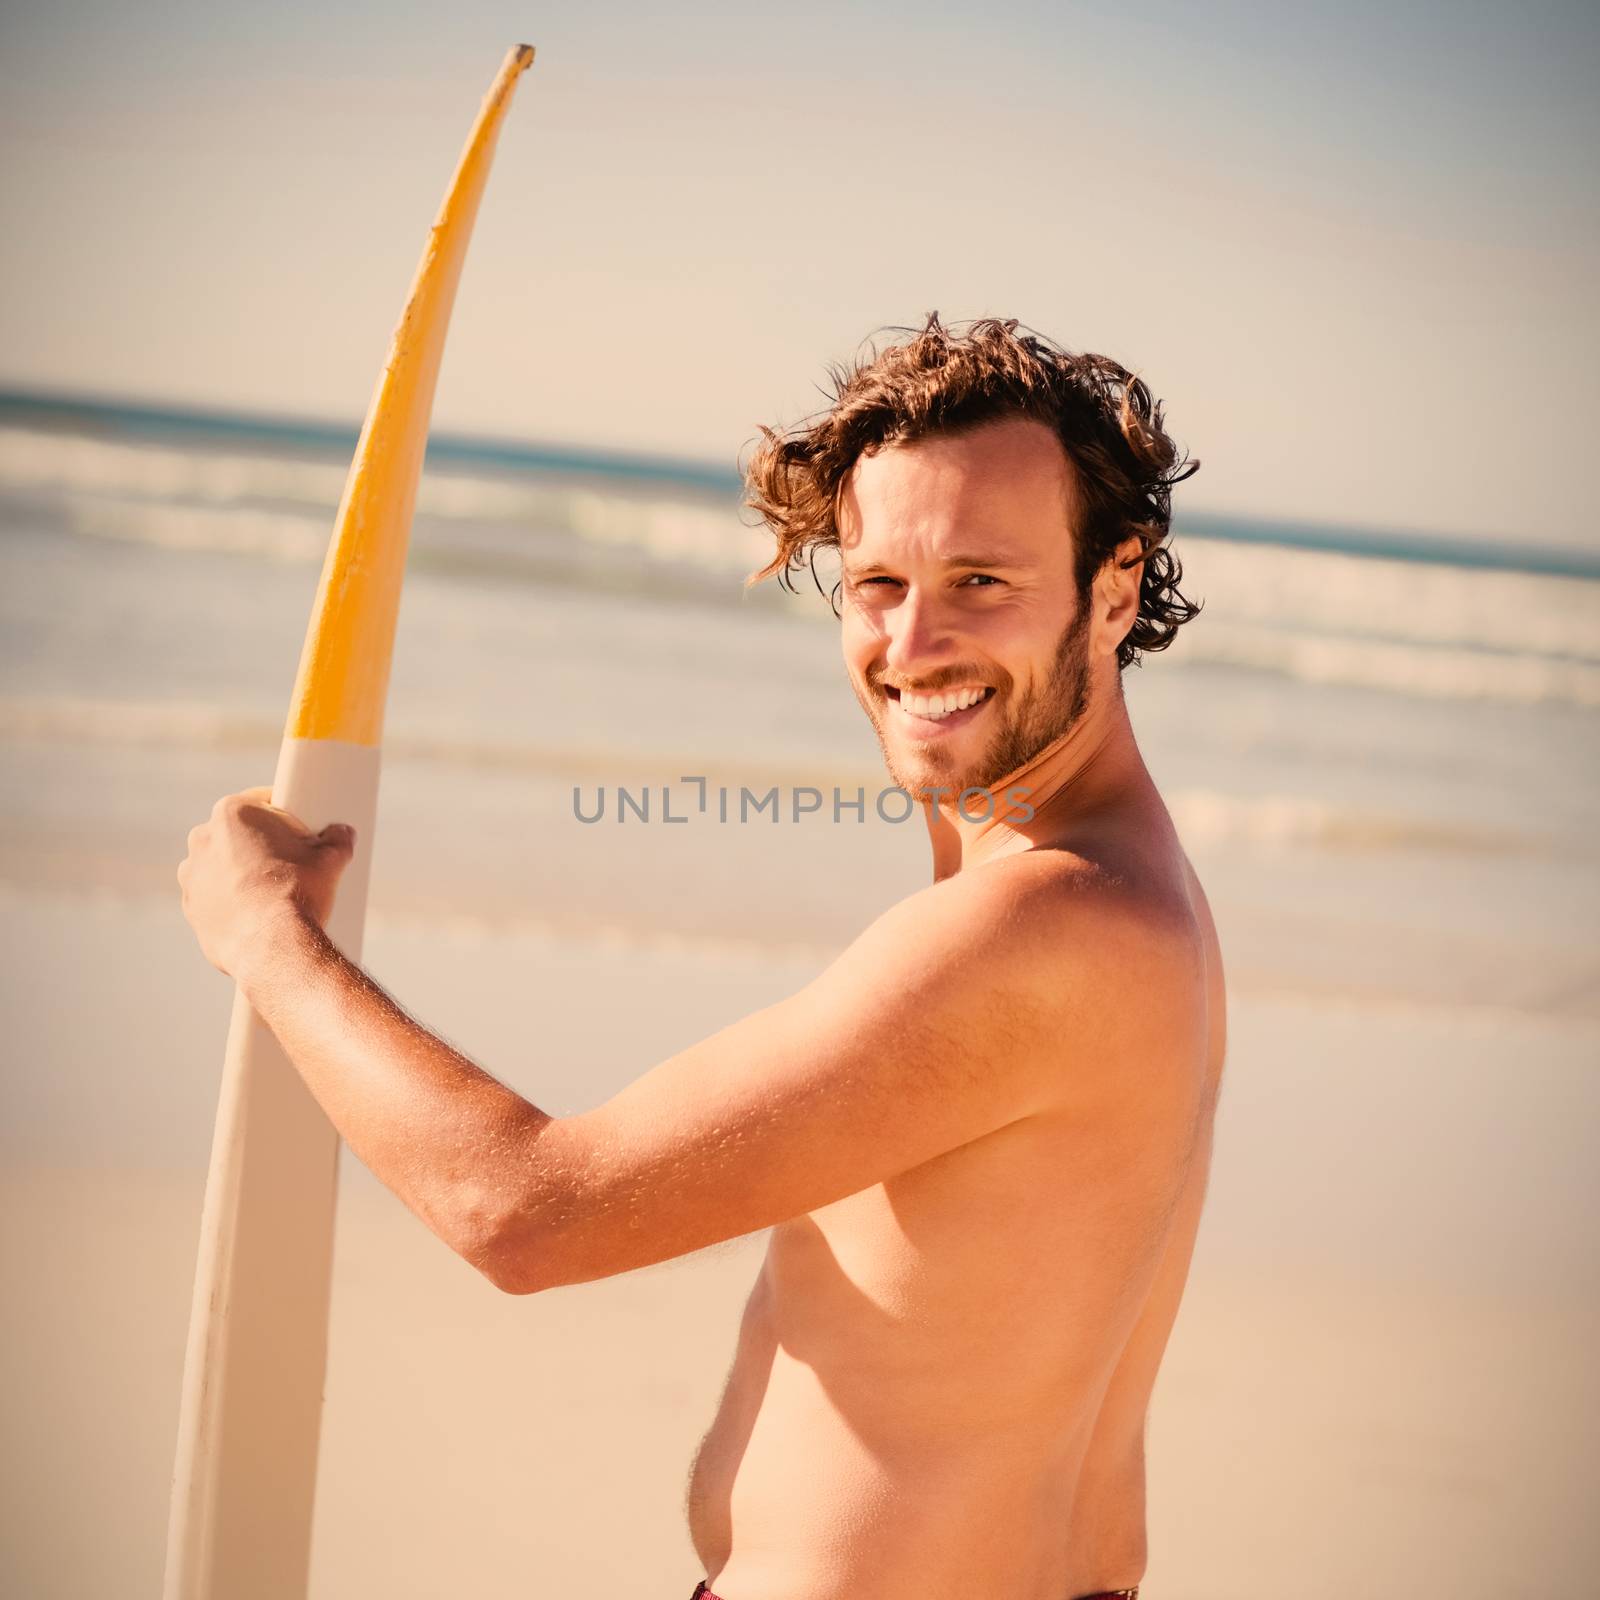 Portrait of happy shirtless man holding surfboard at beach by Wavebreakmedia